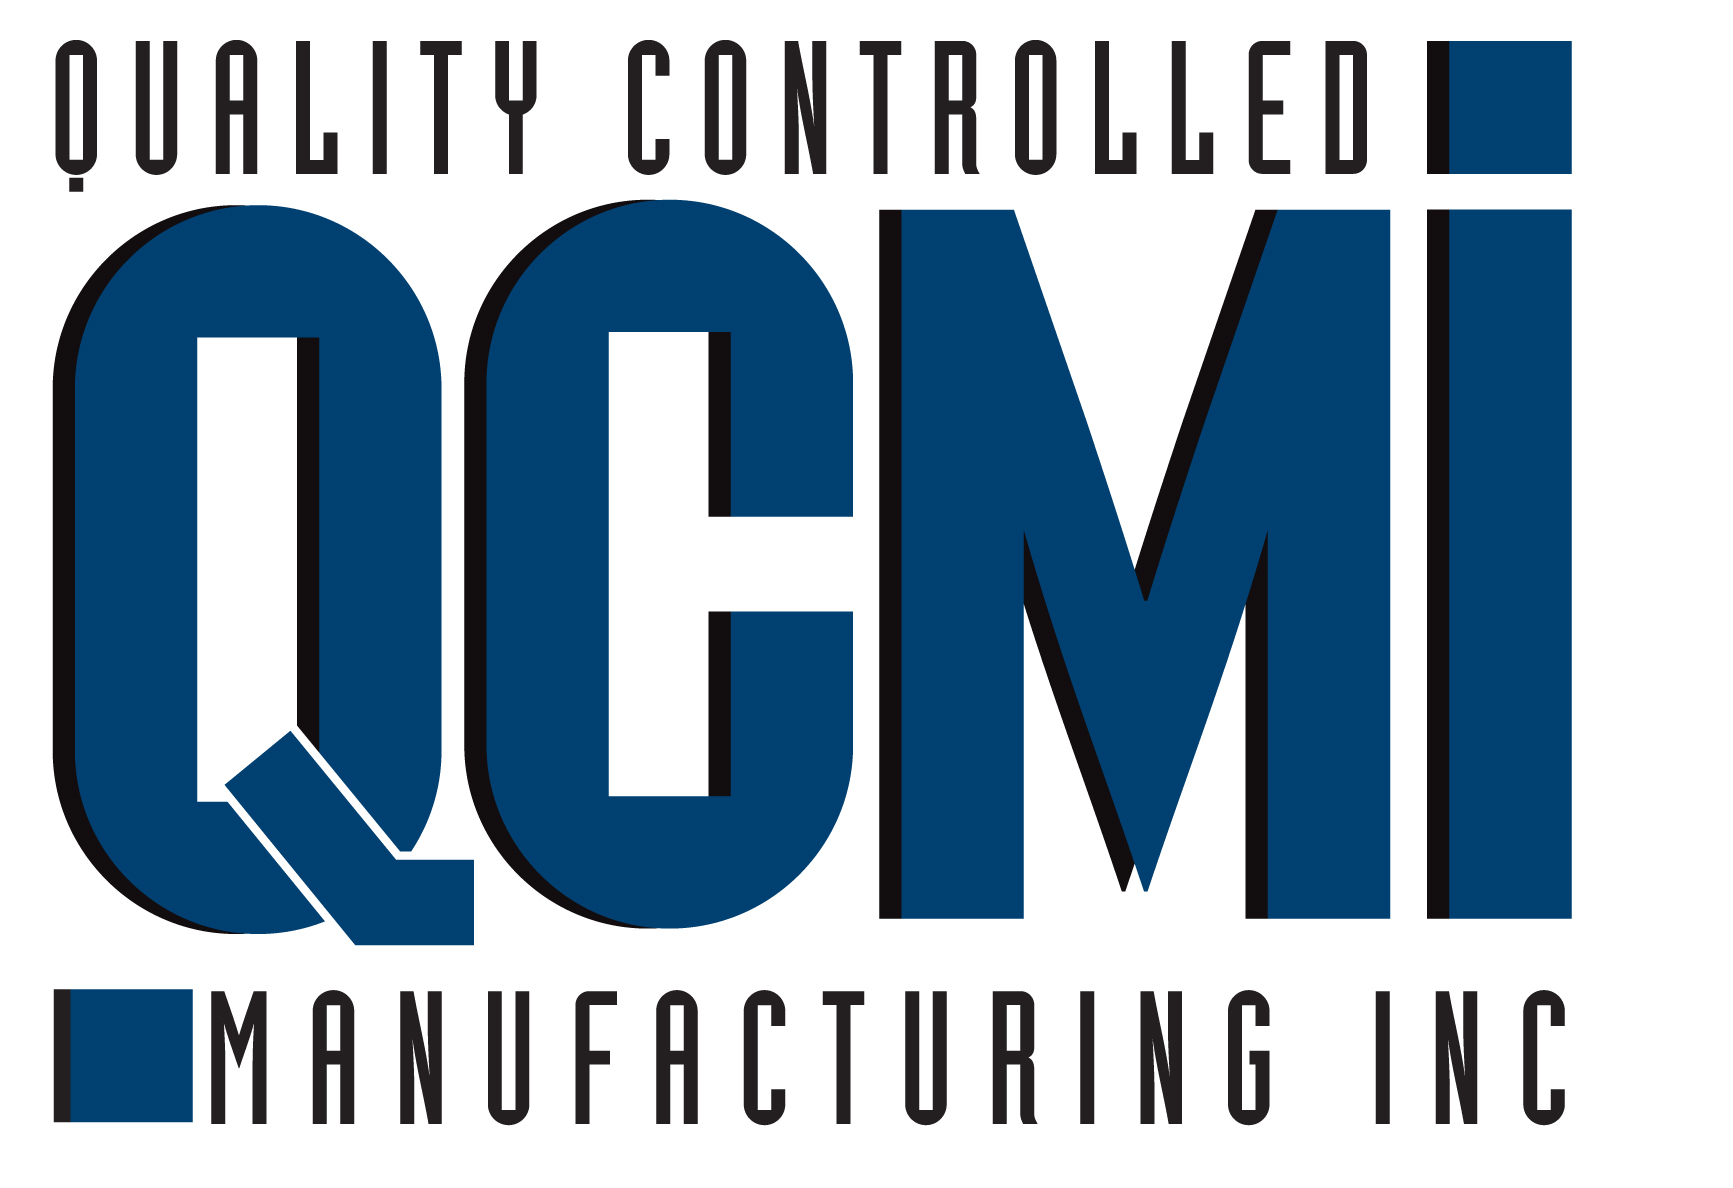 Quality Controlled Manufacturing Inc. Logo